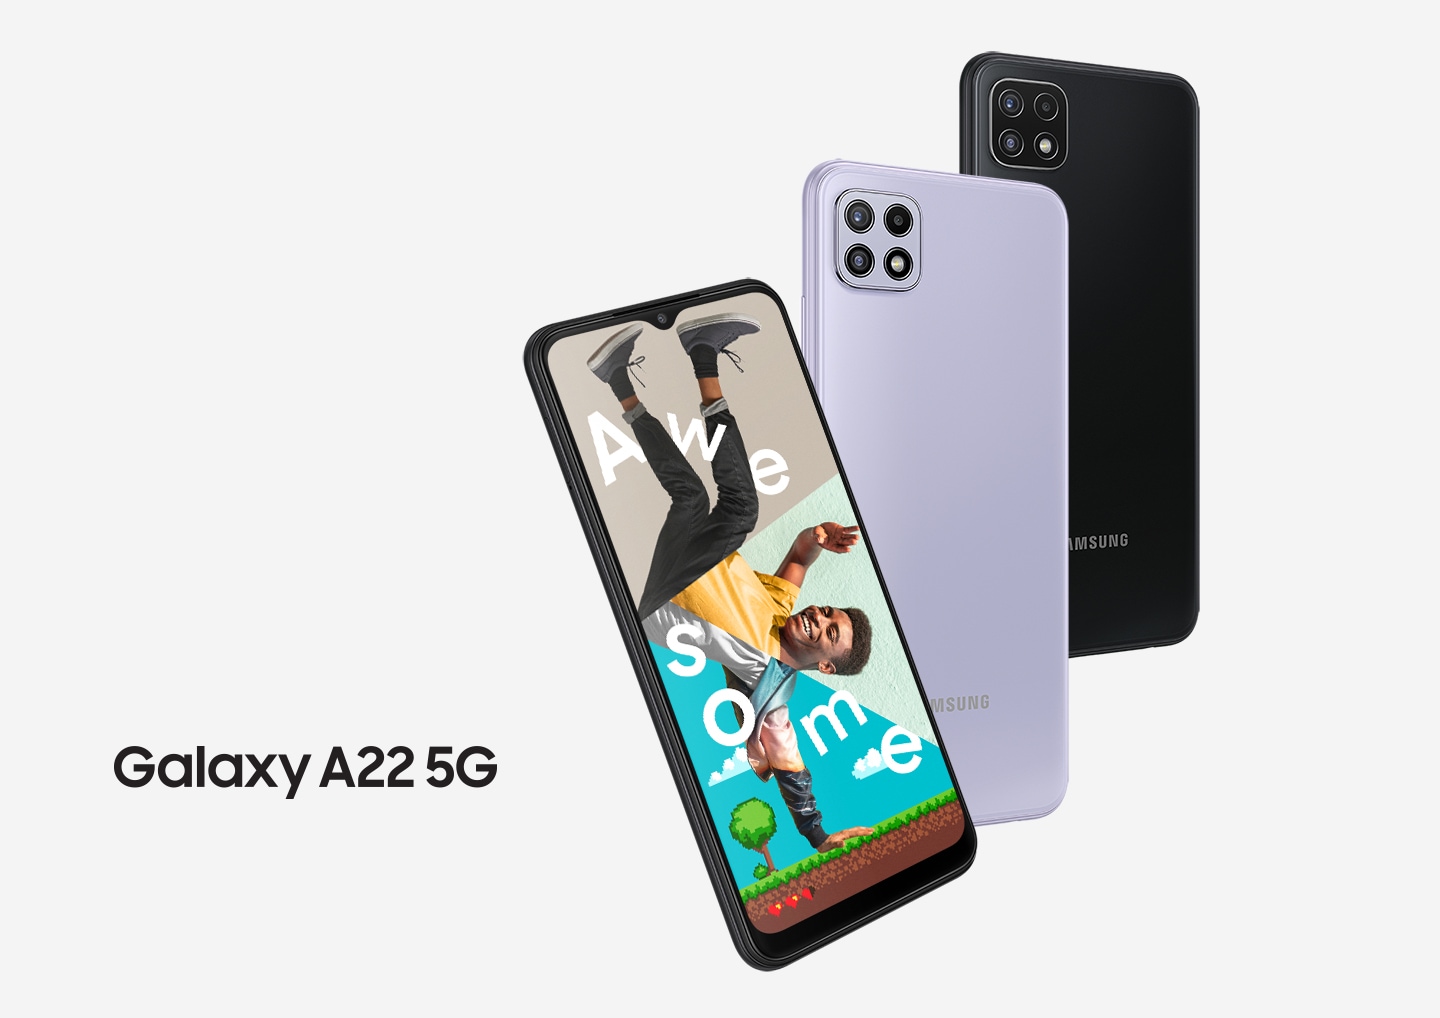 Three Galaxy A22 5G series phones in a row. One seen from the front, and onscreen is a collage of a man's arm, upper body, and legs with the word Awesome. Two seen from the rear to show the rear camera and the colors violet and gray.